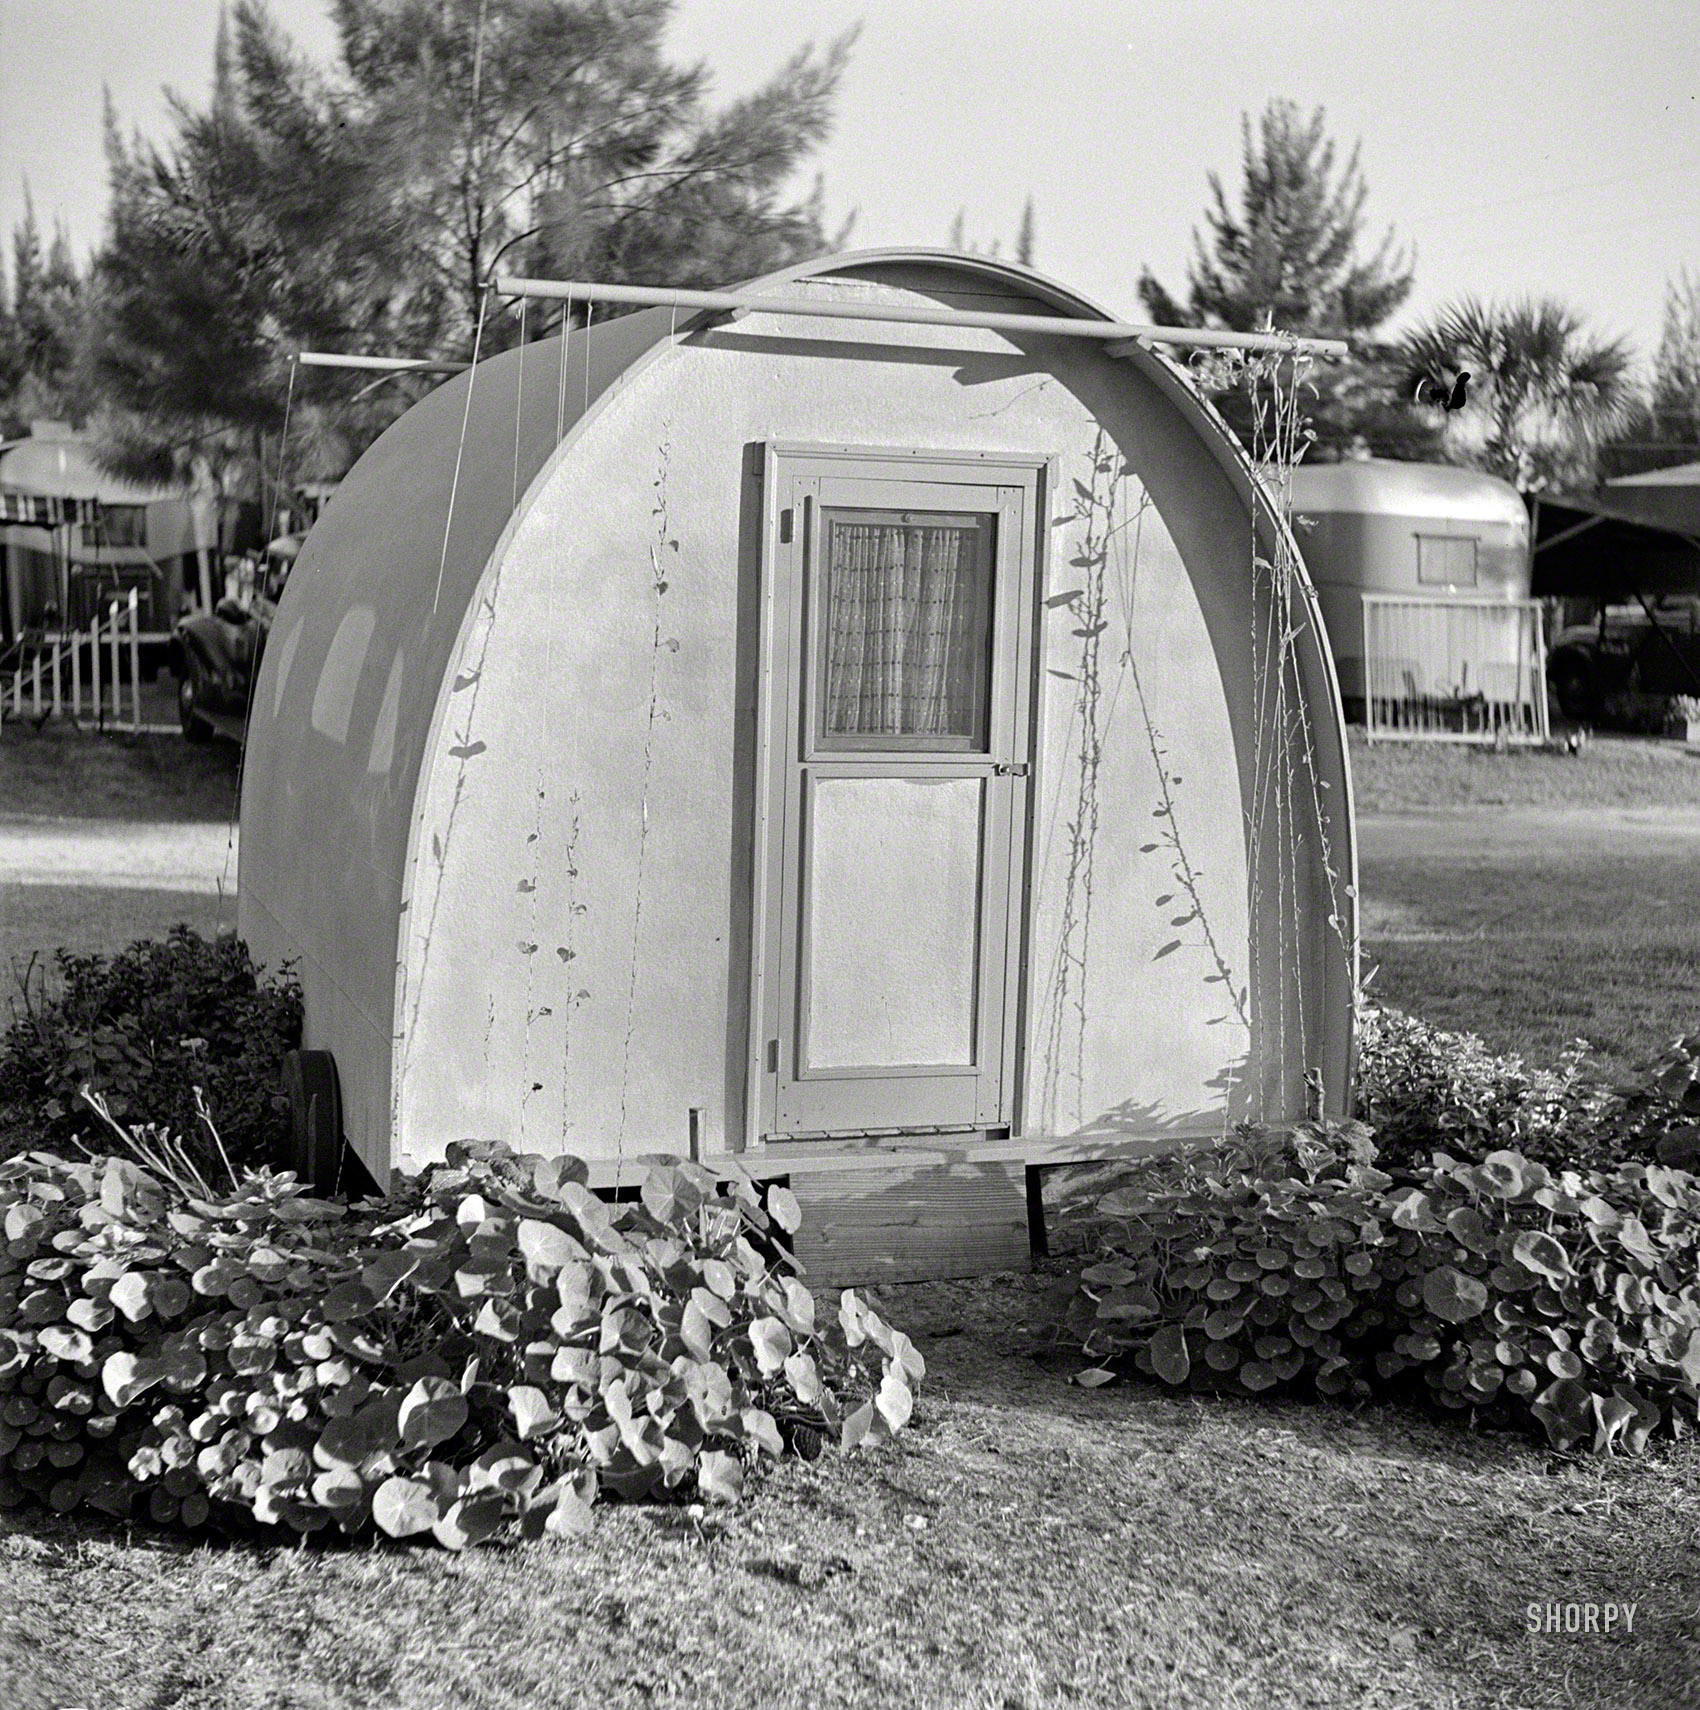 January 1941. "Trailer park in Sarasota, Florida." A baby bungalow nestled in nasturtiums. Photo by Marion Post Wolcott. View full size.